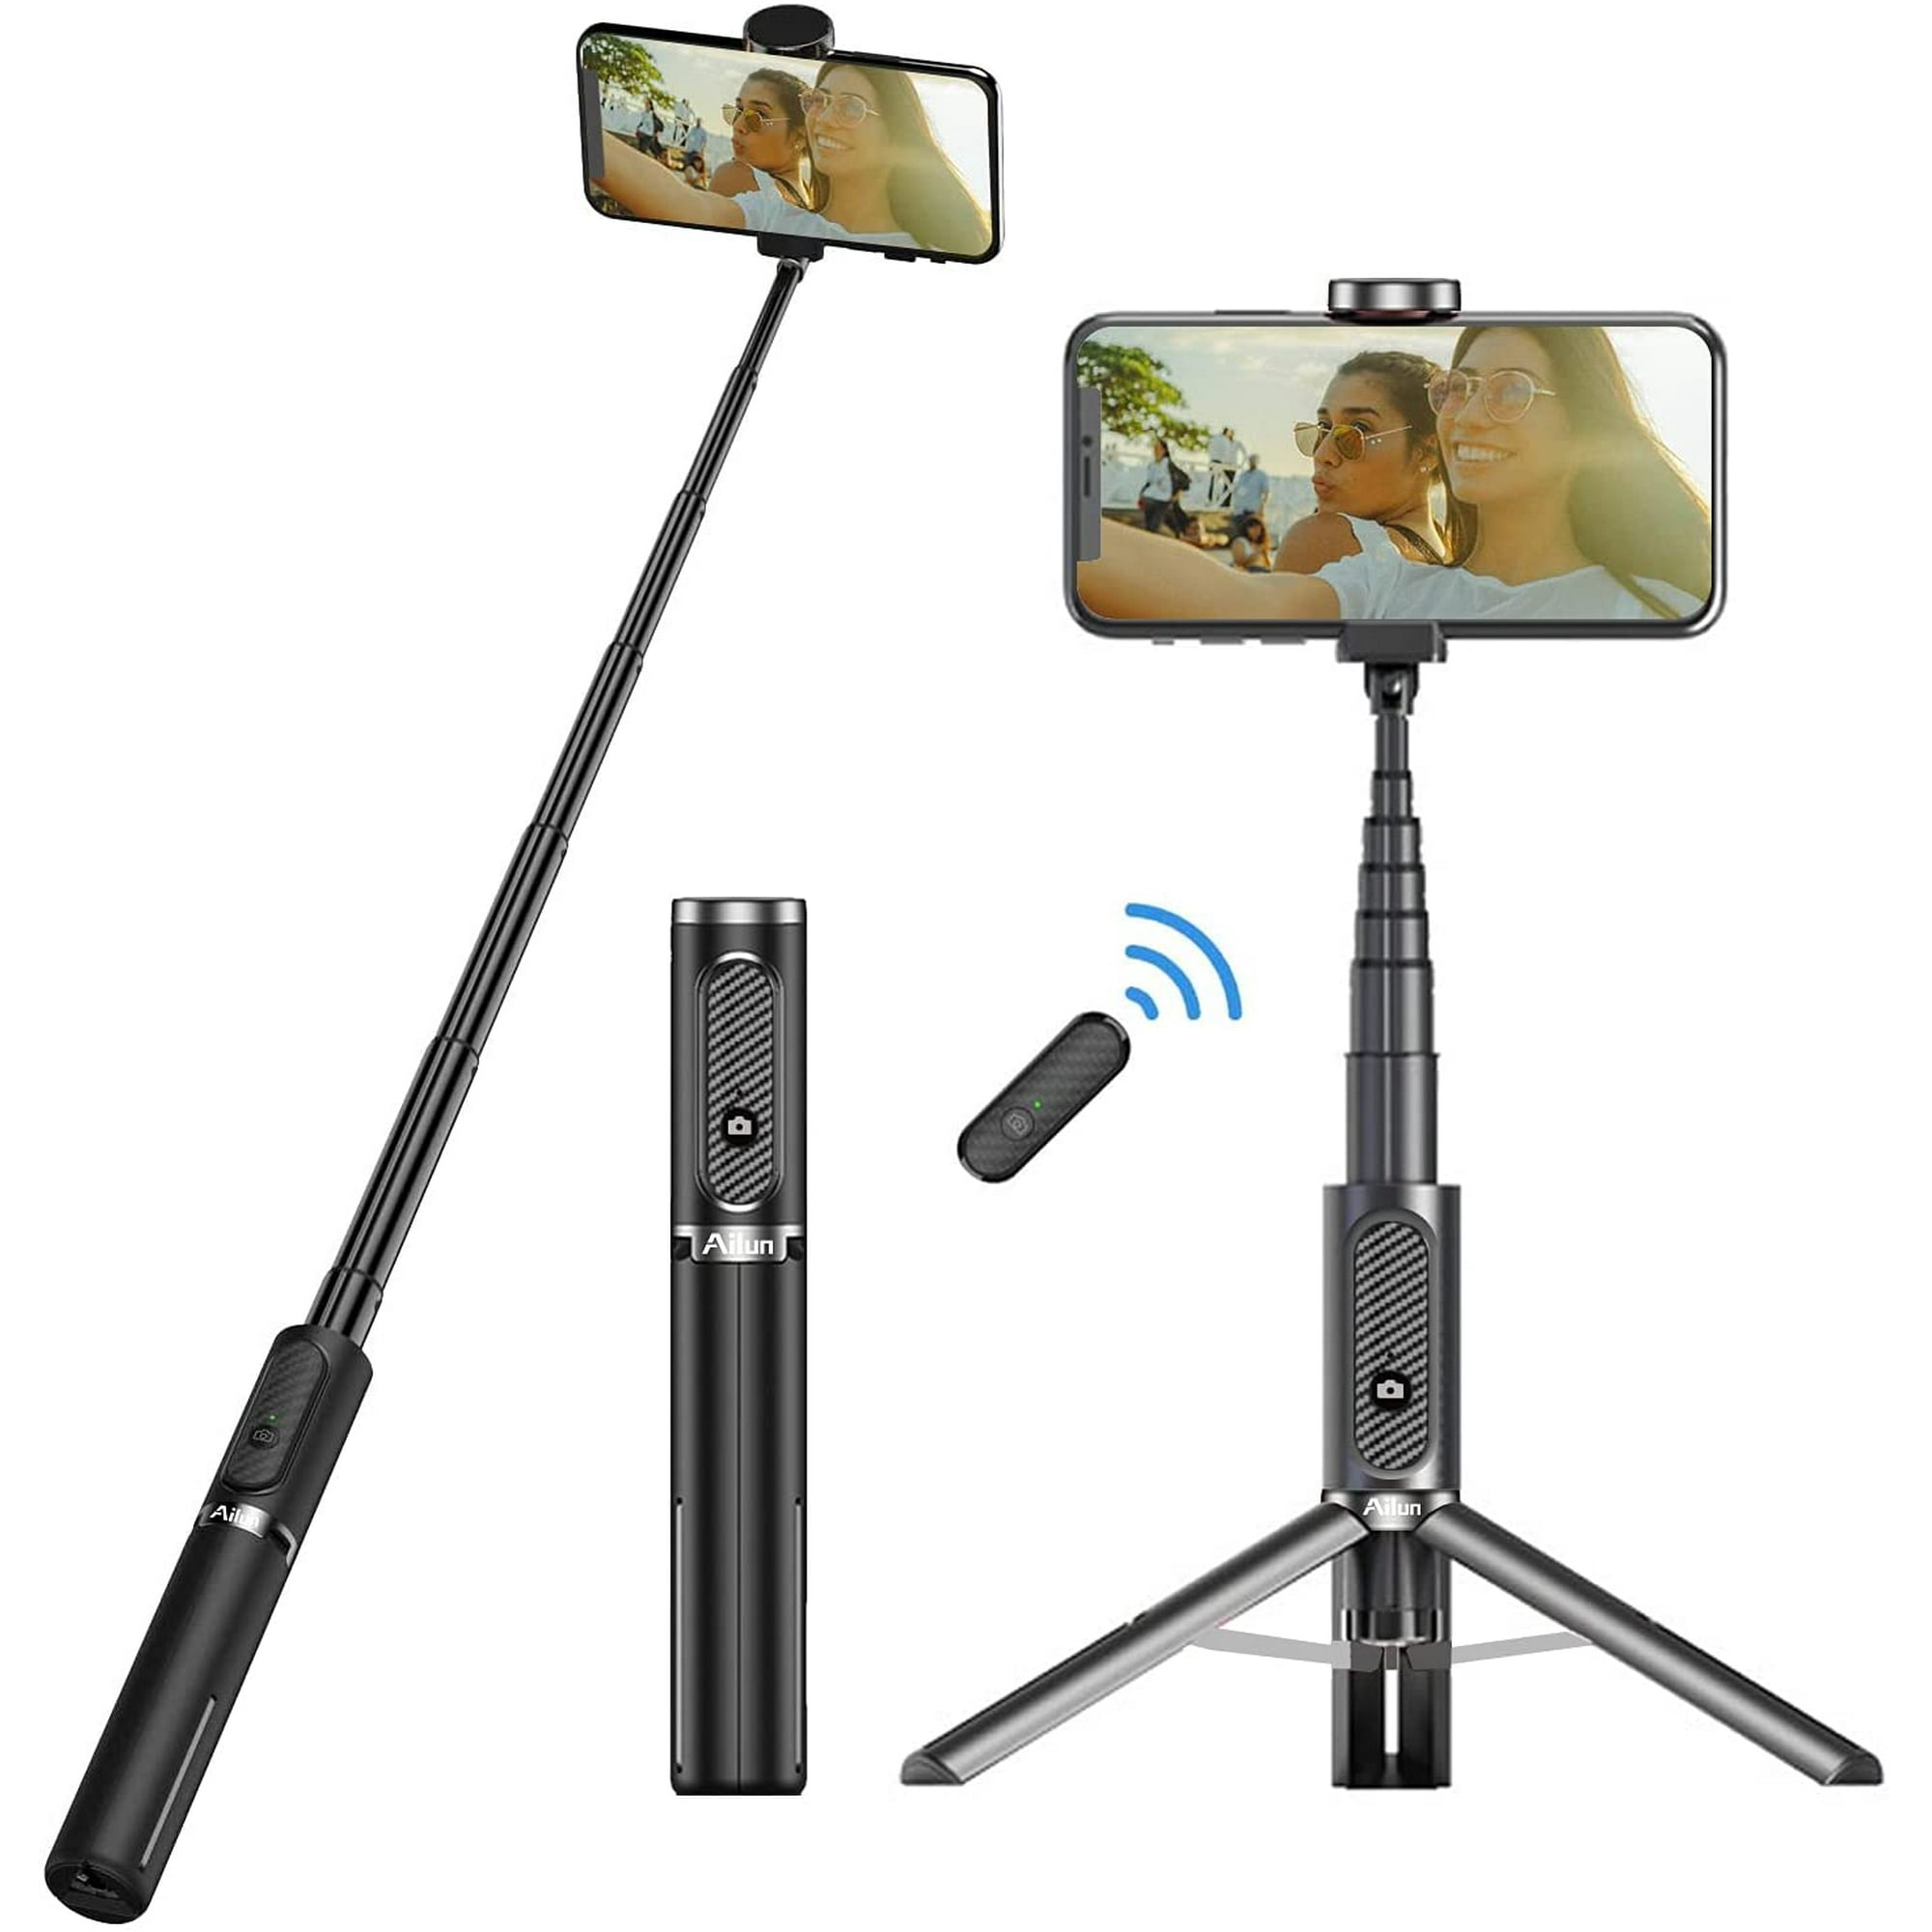 Ailun Selfie Stick Tripod,Extendable Aluminum,3 in Wireless Remote and 360 Stand Compatible with iPhone Pro/XS Max/XS/XR/X/8/7,and More Smartphones | Walmart Canada